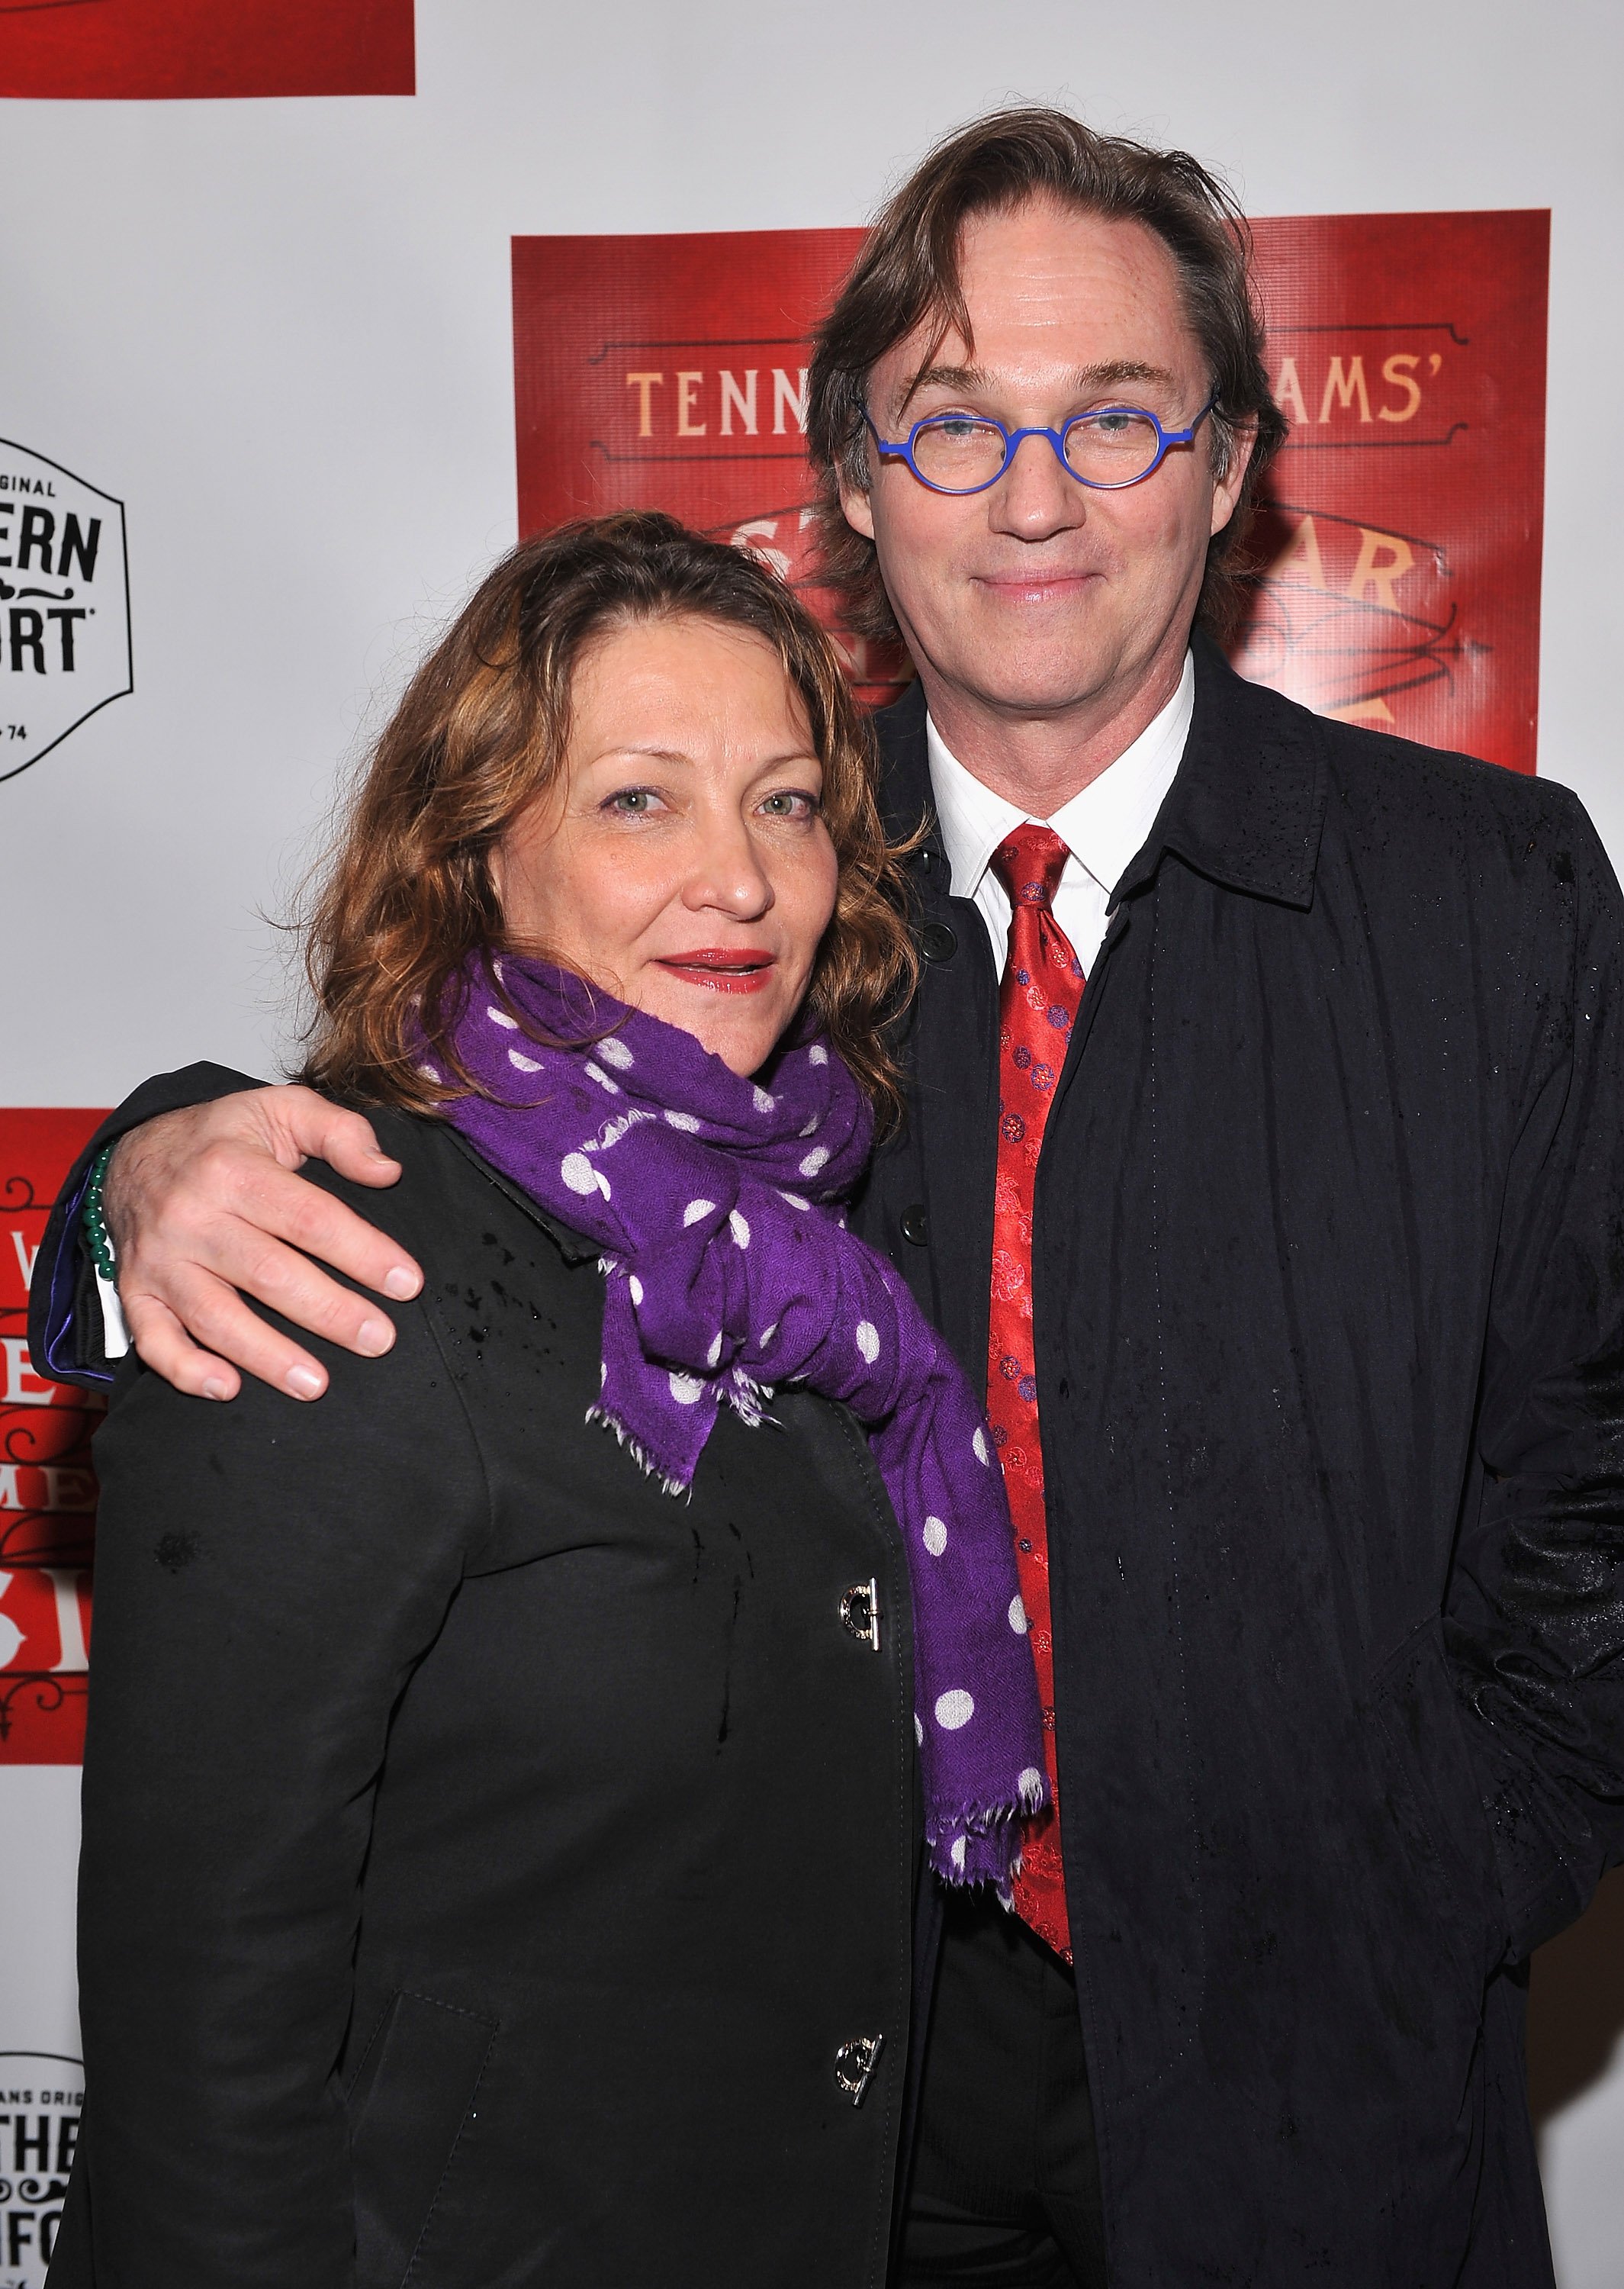 Actor Richard Thomas and his wife Georgiana Bischoff (L) attend the opening night of "A Streetcar Named Desire" at The Broadhurst Theatre on April 22, 2012 in New York City. | Source: Getty Images